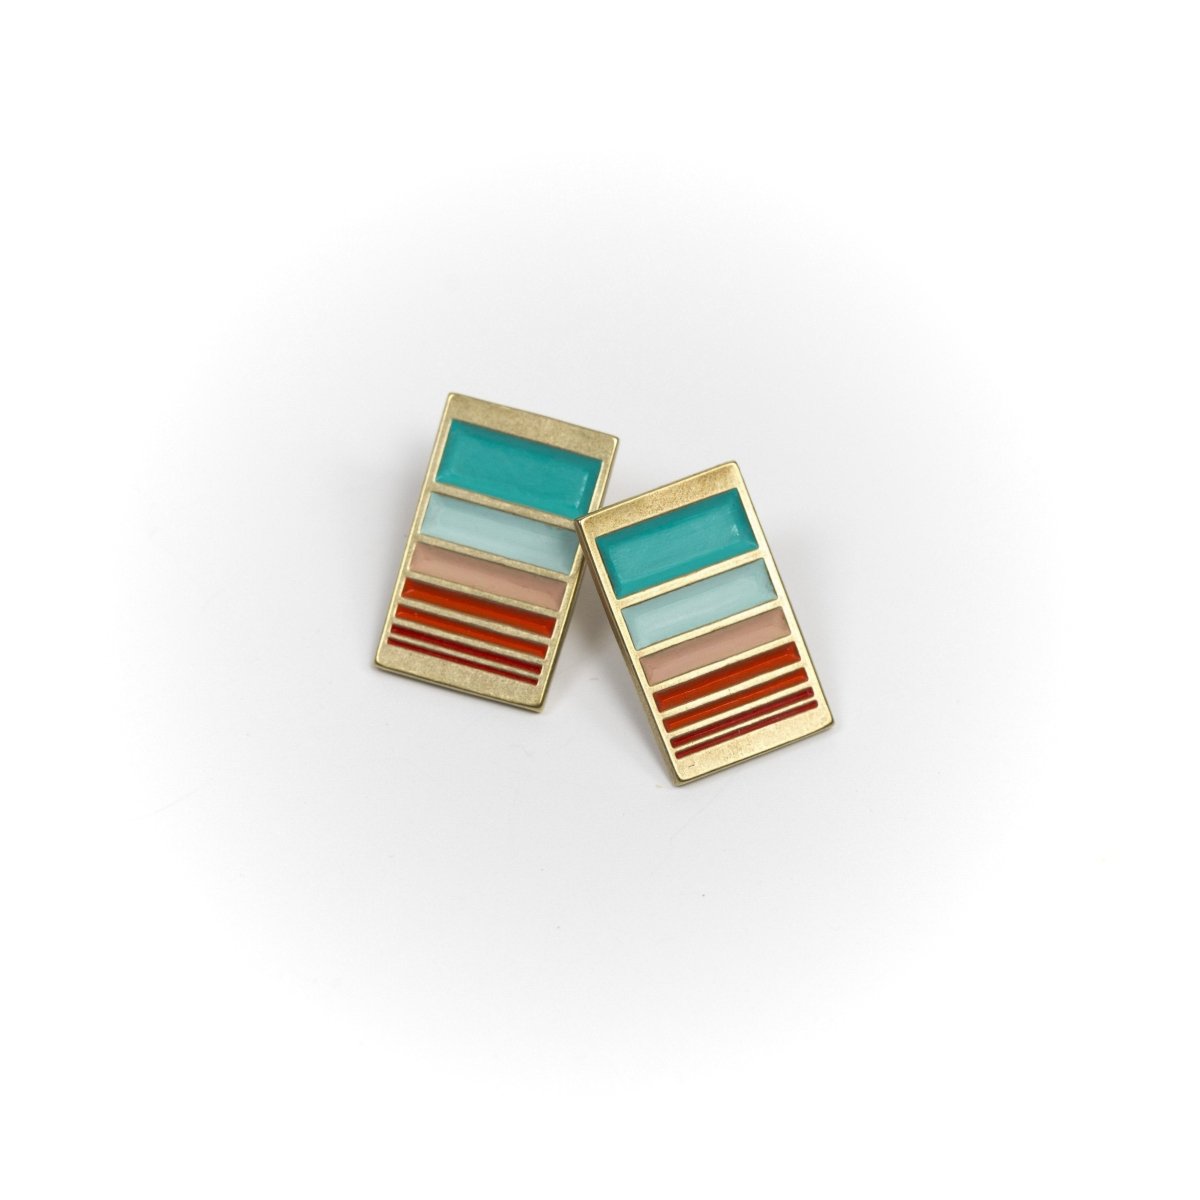 A pair of rectangular, cast-bronze stud earrings, decorated in our Mexico colorway, with a gradient of rich teal and red paint. Hand-crafted in Portland, Oregon. 